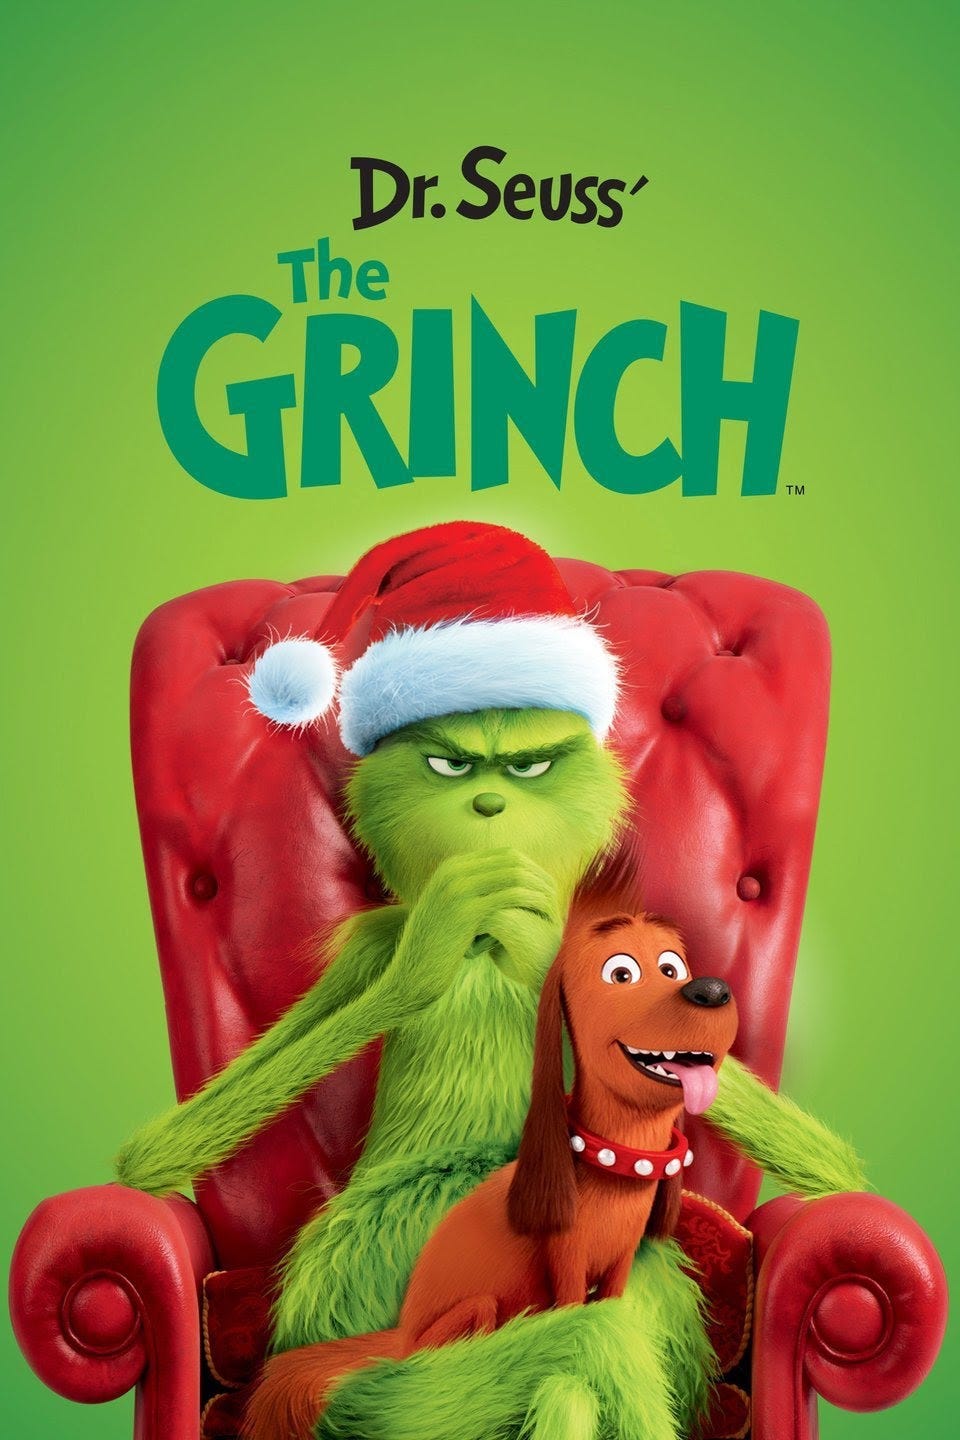 How the Grinch Stole Christmas (and Why He Gave It Back): A Look